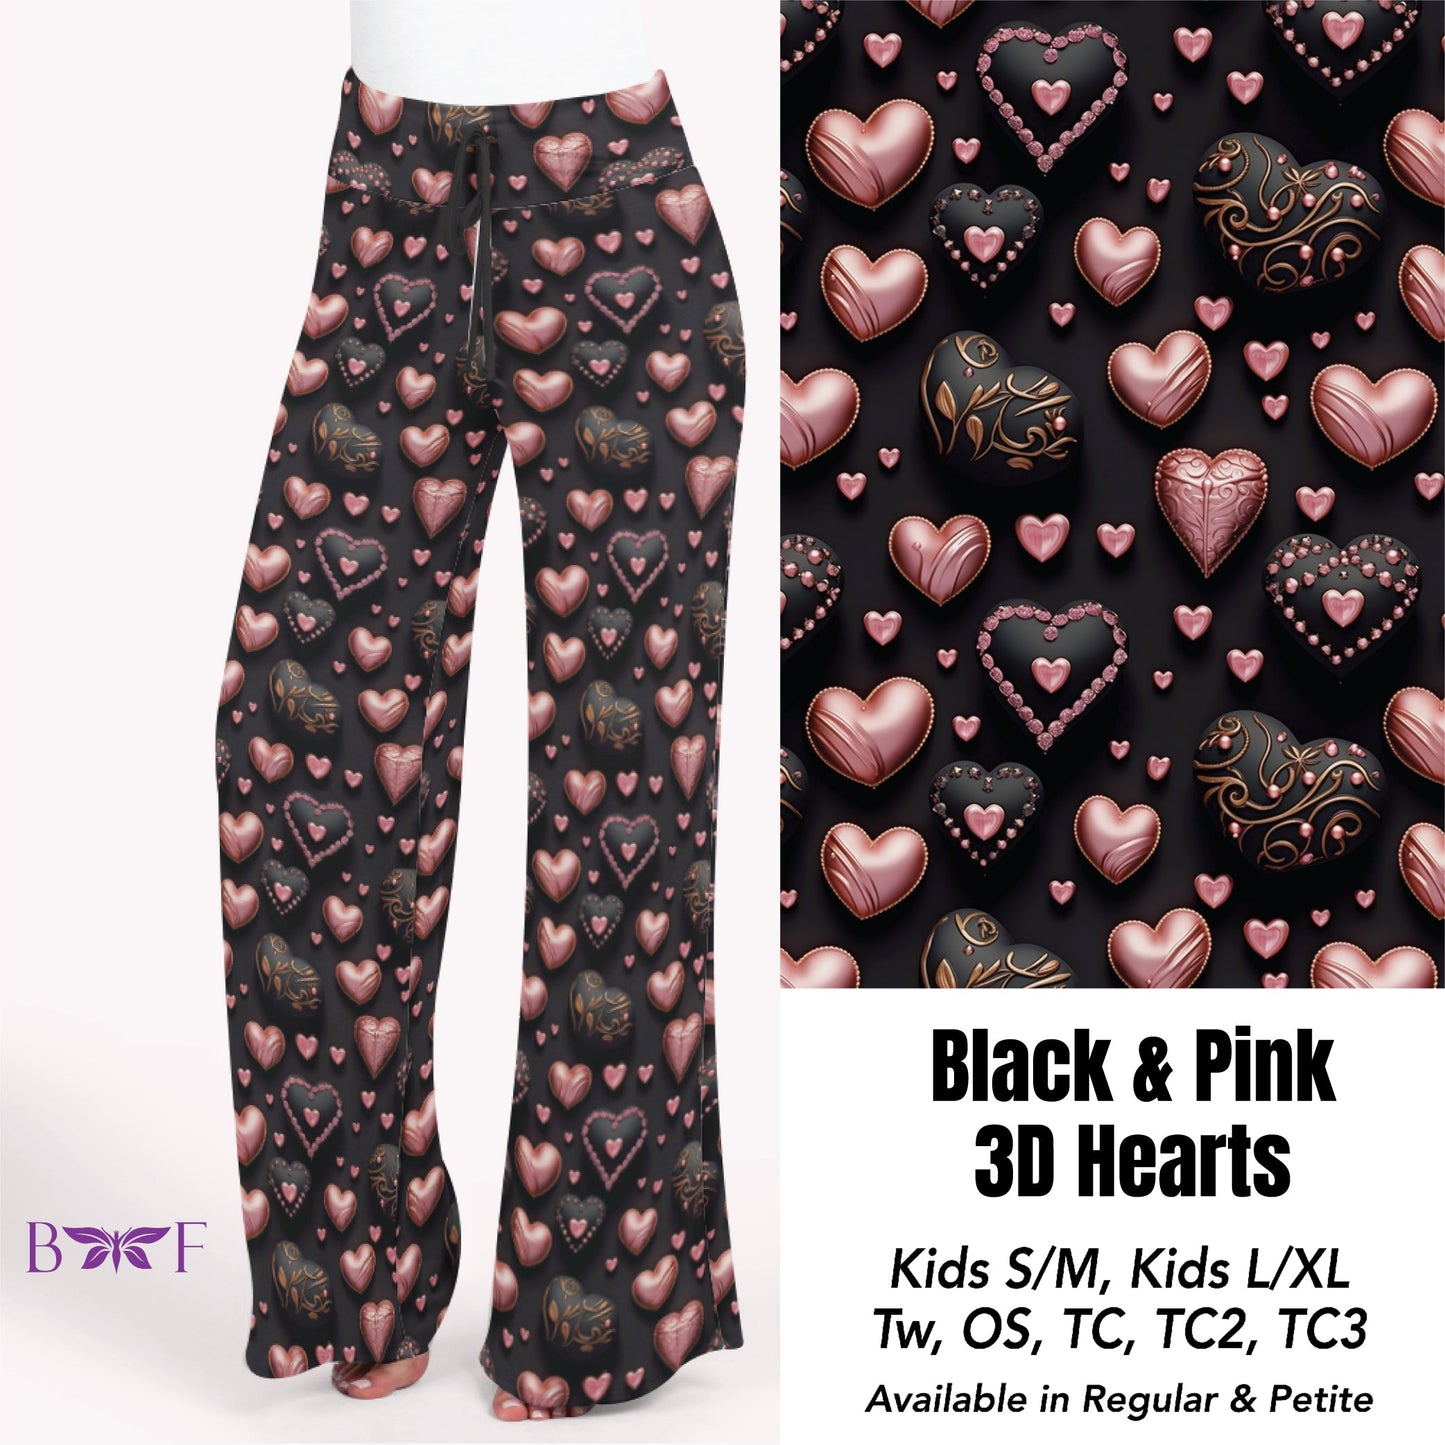 Black & Pink 3D hearts leggings with pockets